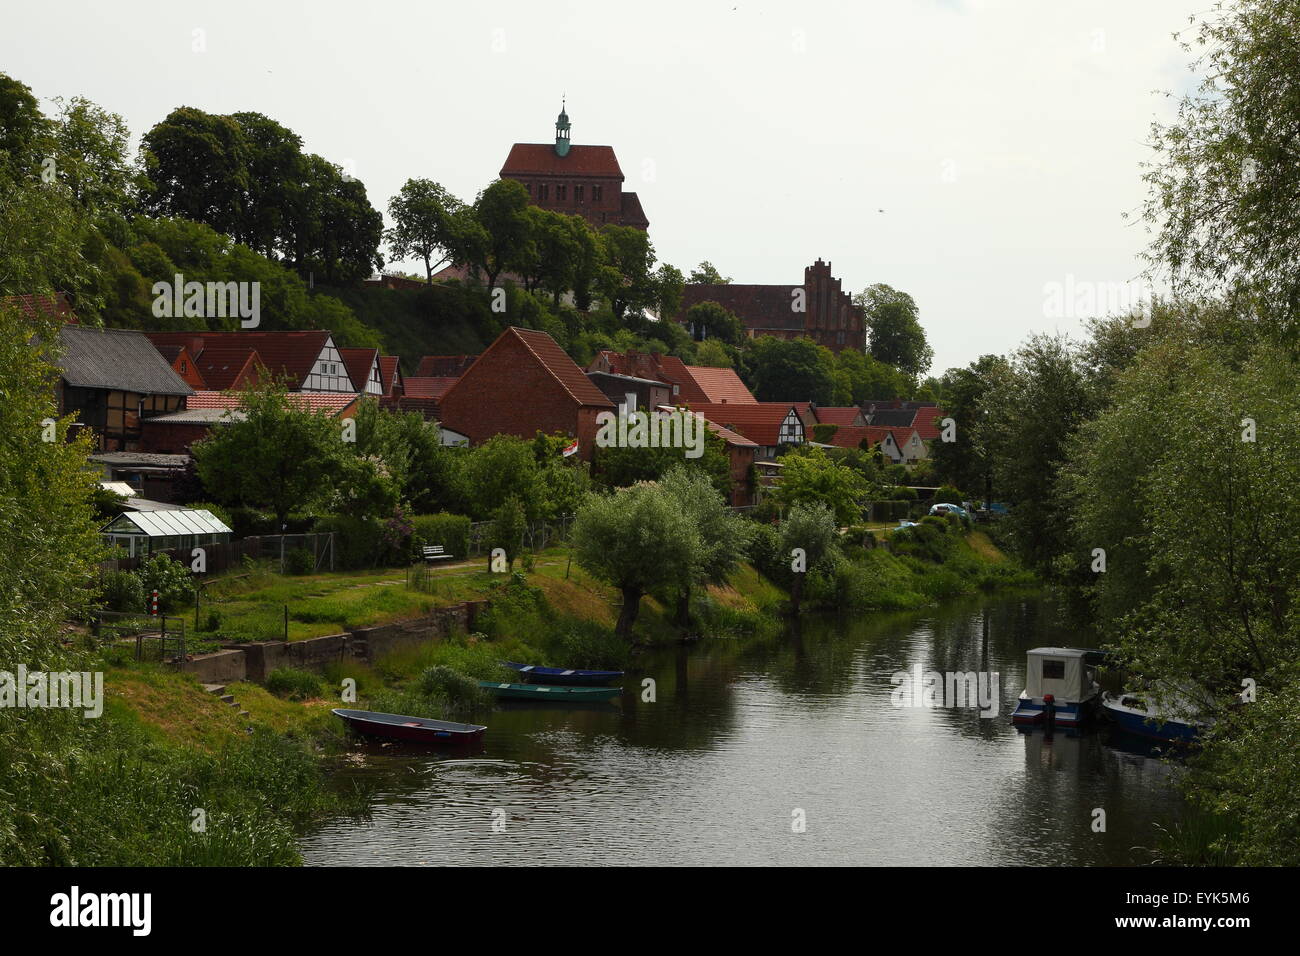 Cathedral on a hill and houses near a river Stock Photo